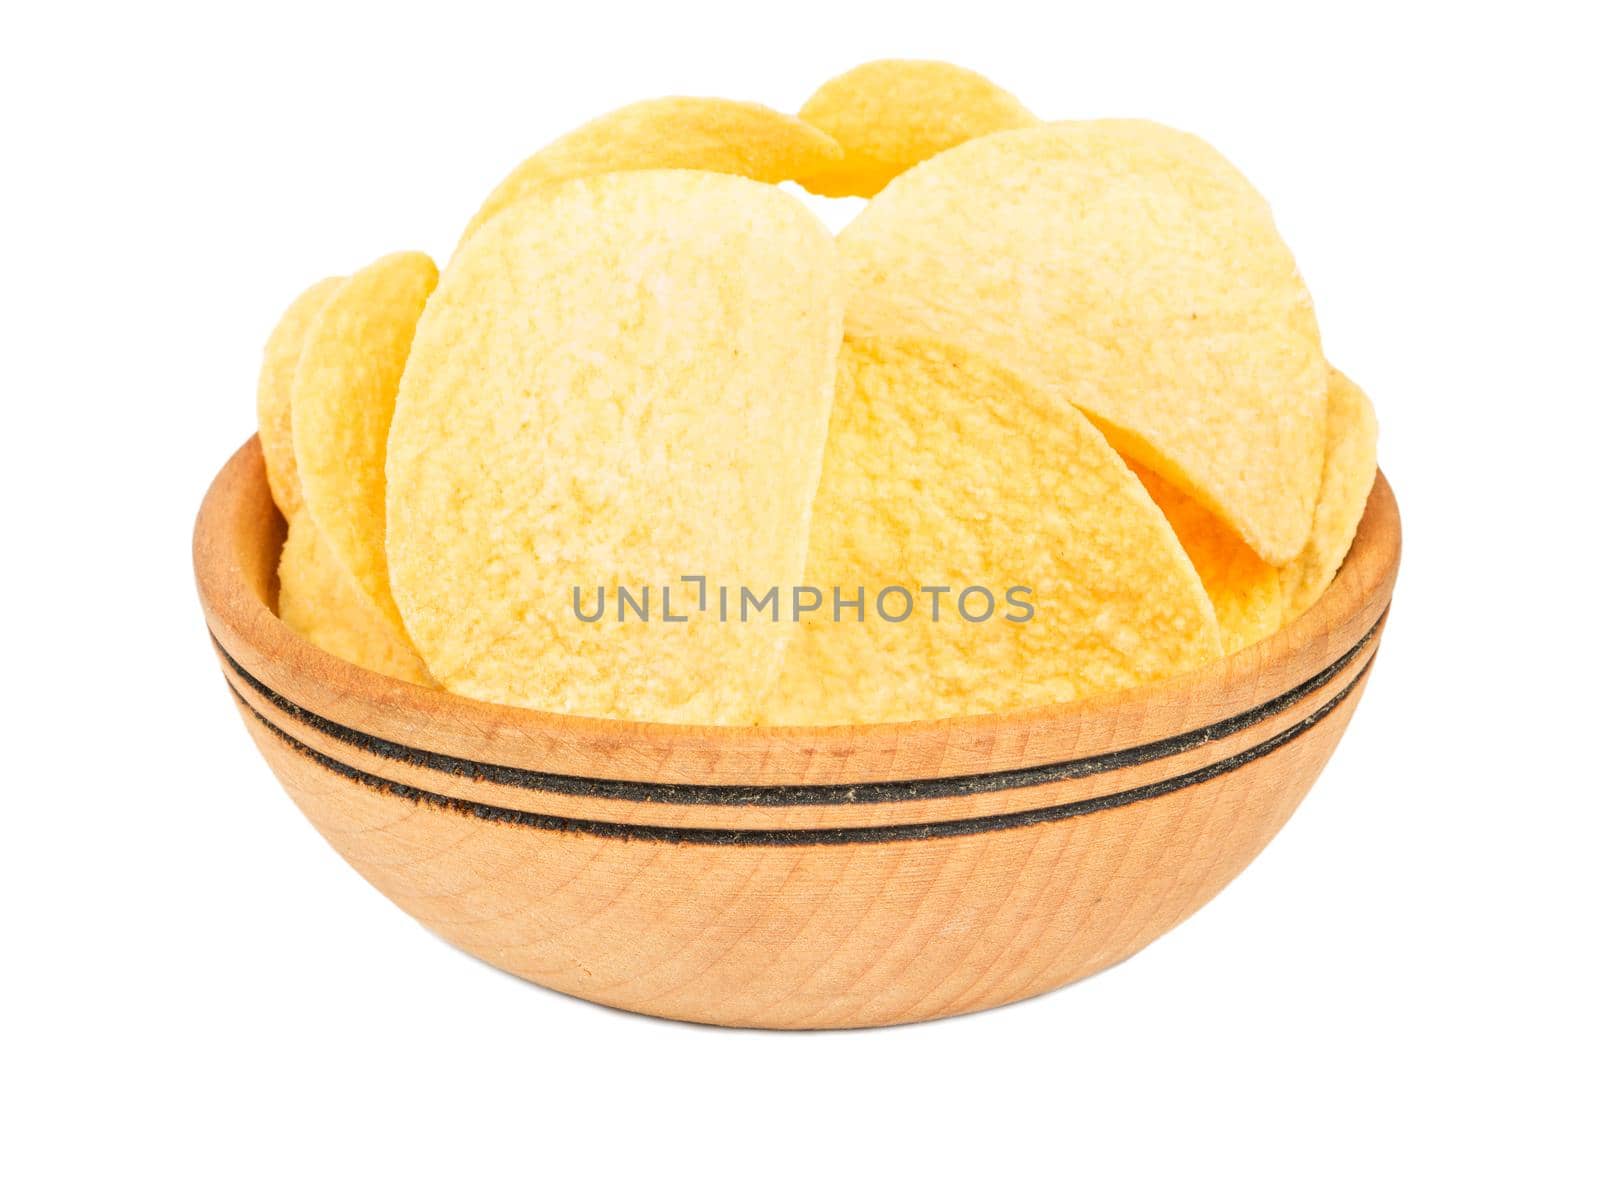 Potato chips in wooden bowl on white background